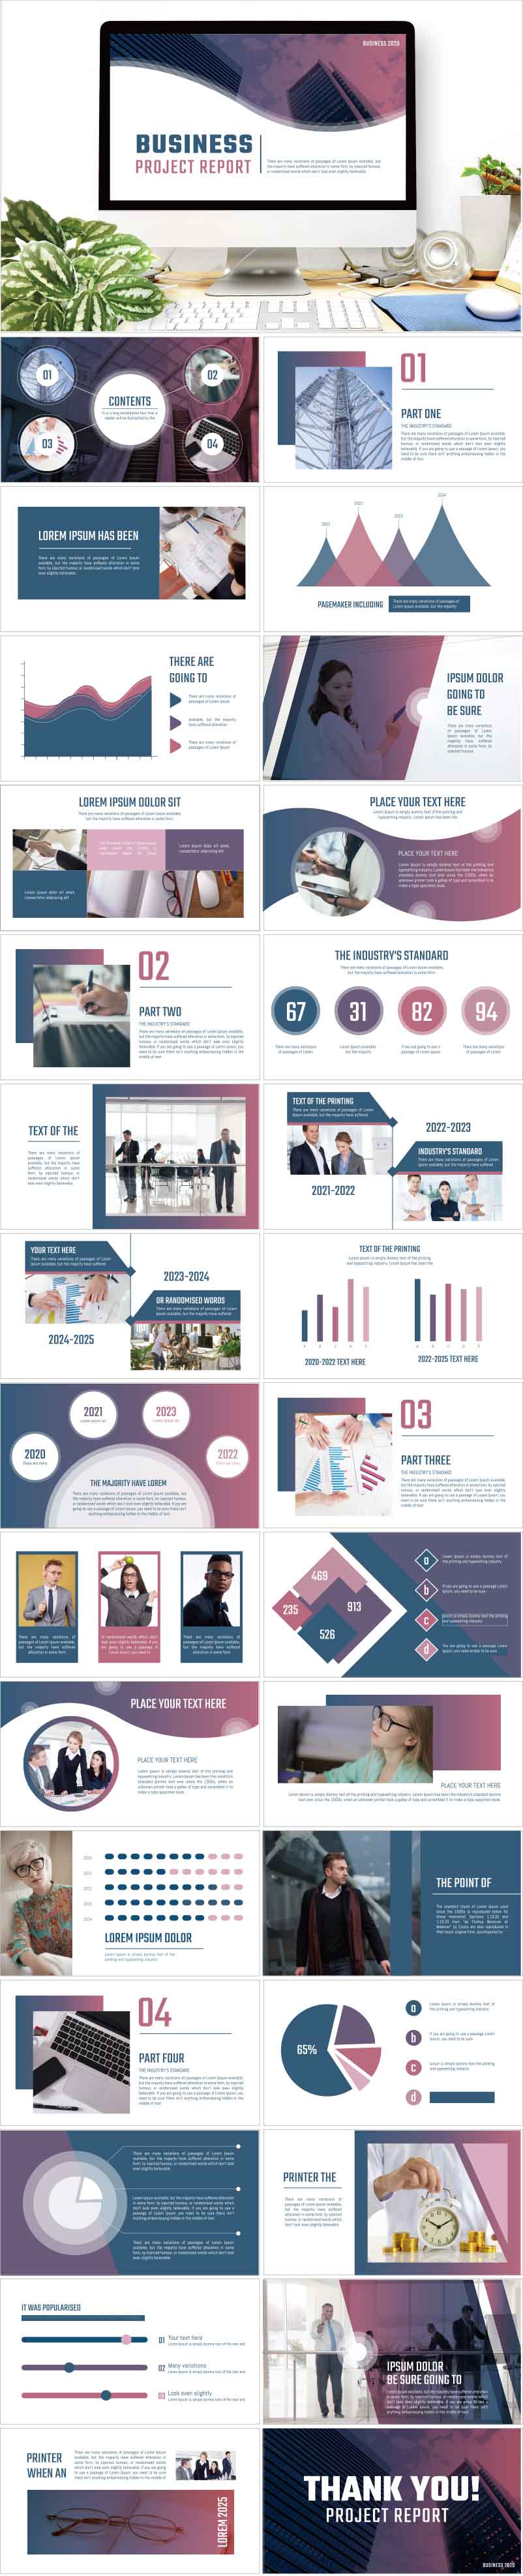 PowerPoint template vol.44